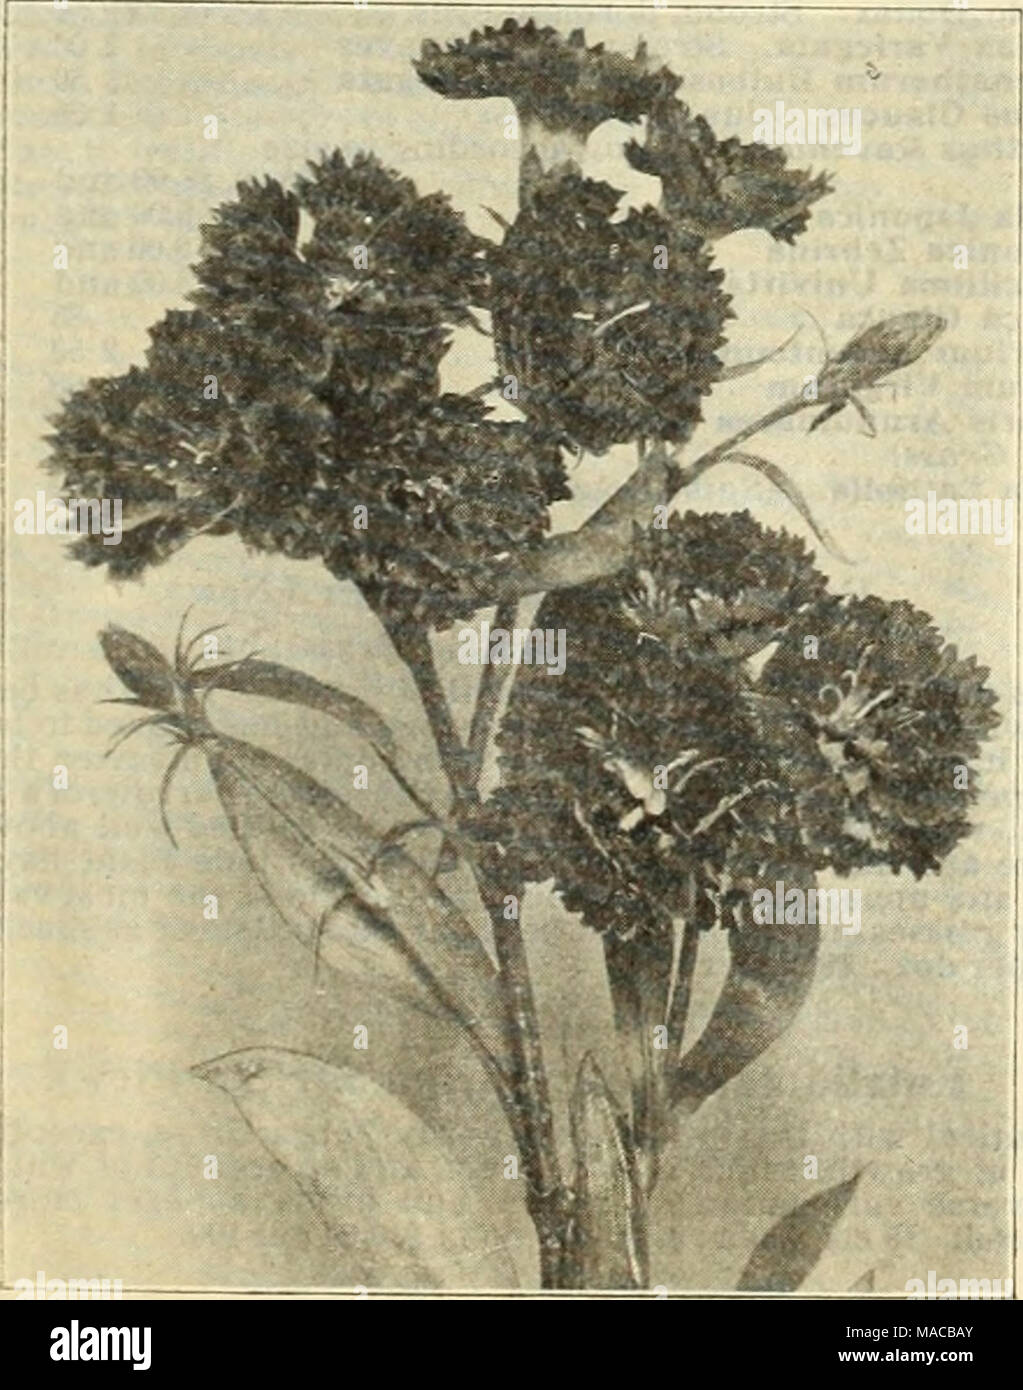 . Dreer's wholesale price list : seeds, plants, bulbs, etc . DIANTHUS LATIFOIIUS ATROCOCCINEUS, FL. PL. Digitalis (Foxglove). Per doz. Per 100 Ambigua orOrandiflora. Strong, 3!4-inch pots . . $0 85 $6 00 aioxinlceflora. White, purple, rose, lilac or mixed. Strong, 4-inch pots 85 8 OO Lanata. 3'/i-inch pots 85 6 00 Dodecatheon (American Cowslip or Shooting Star). Meadia ...â¢ 125 800 Doronicum (Leopard's Bane). Caucaslcum. 3-inch pots 125 800 Clusii. 3-inch pots 125 800 Excelsum. 3-inch pots 125 800 Draba (Whitlow Grass). Androsacea. 3-inch pots 1 25 8 00 Echinops (Globe Thistle). Banaticus. 3' Stock Photo